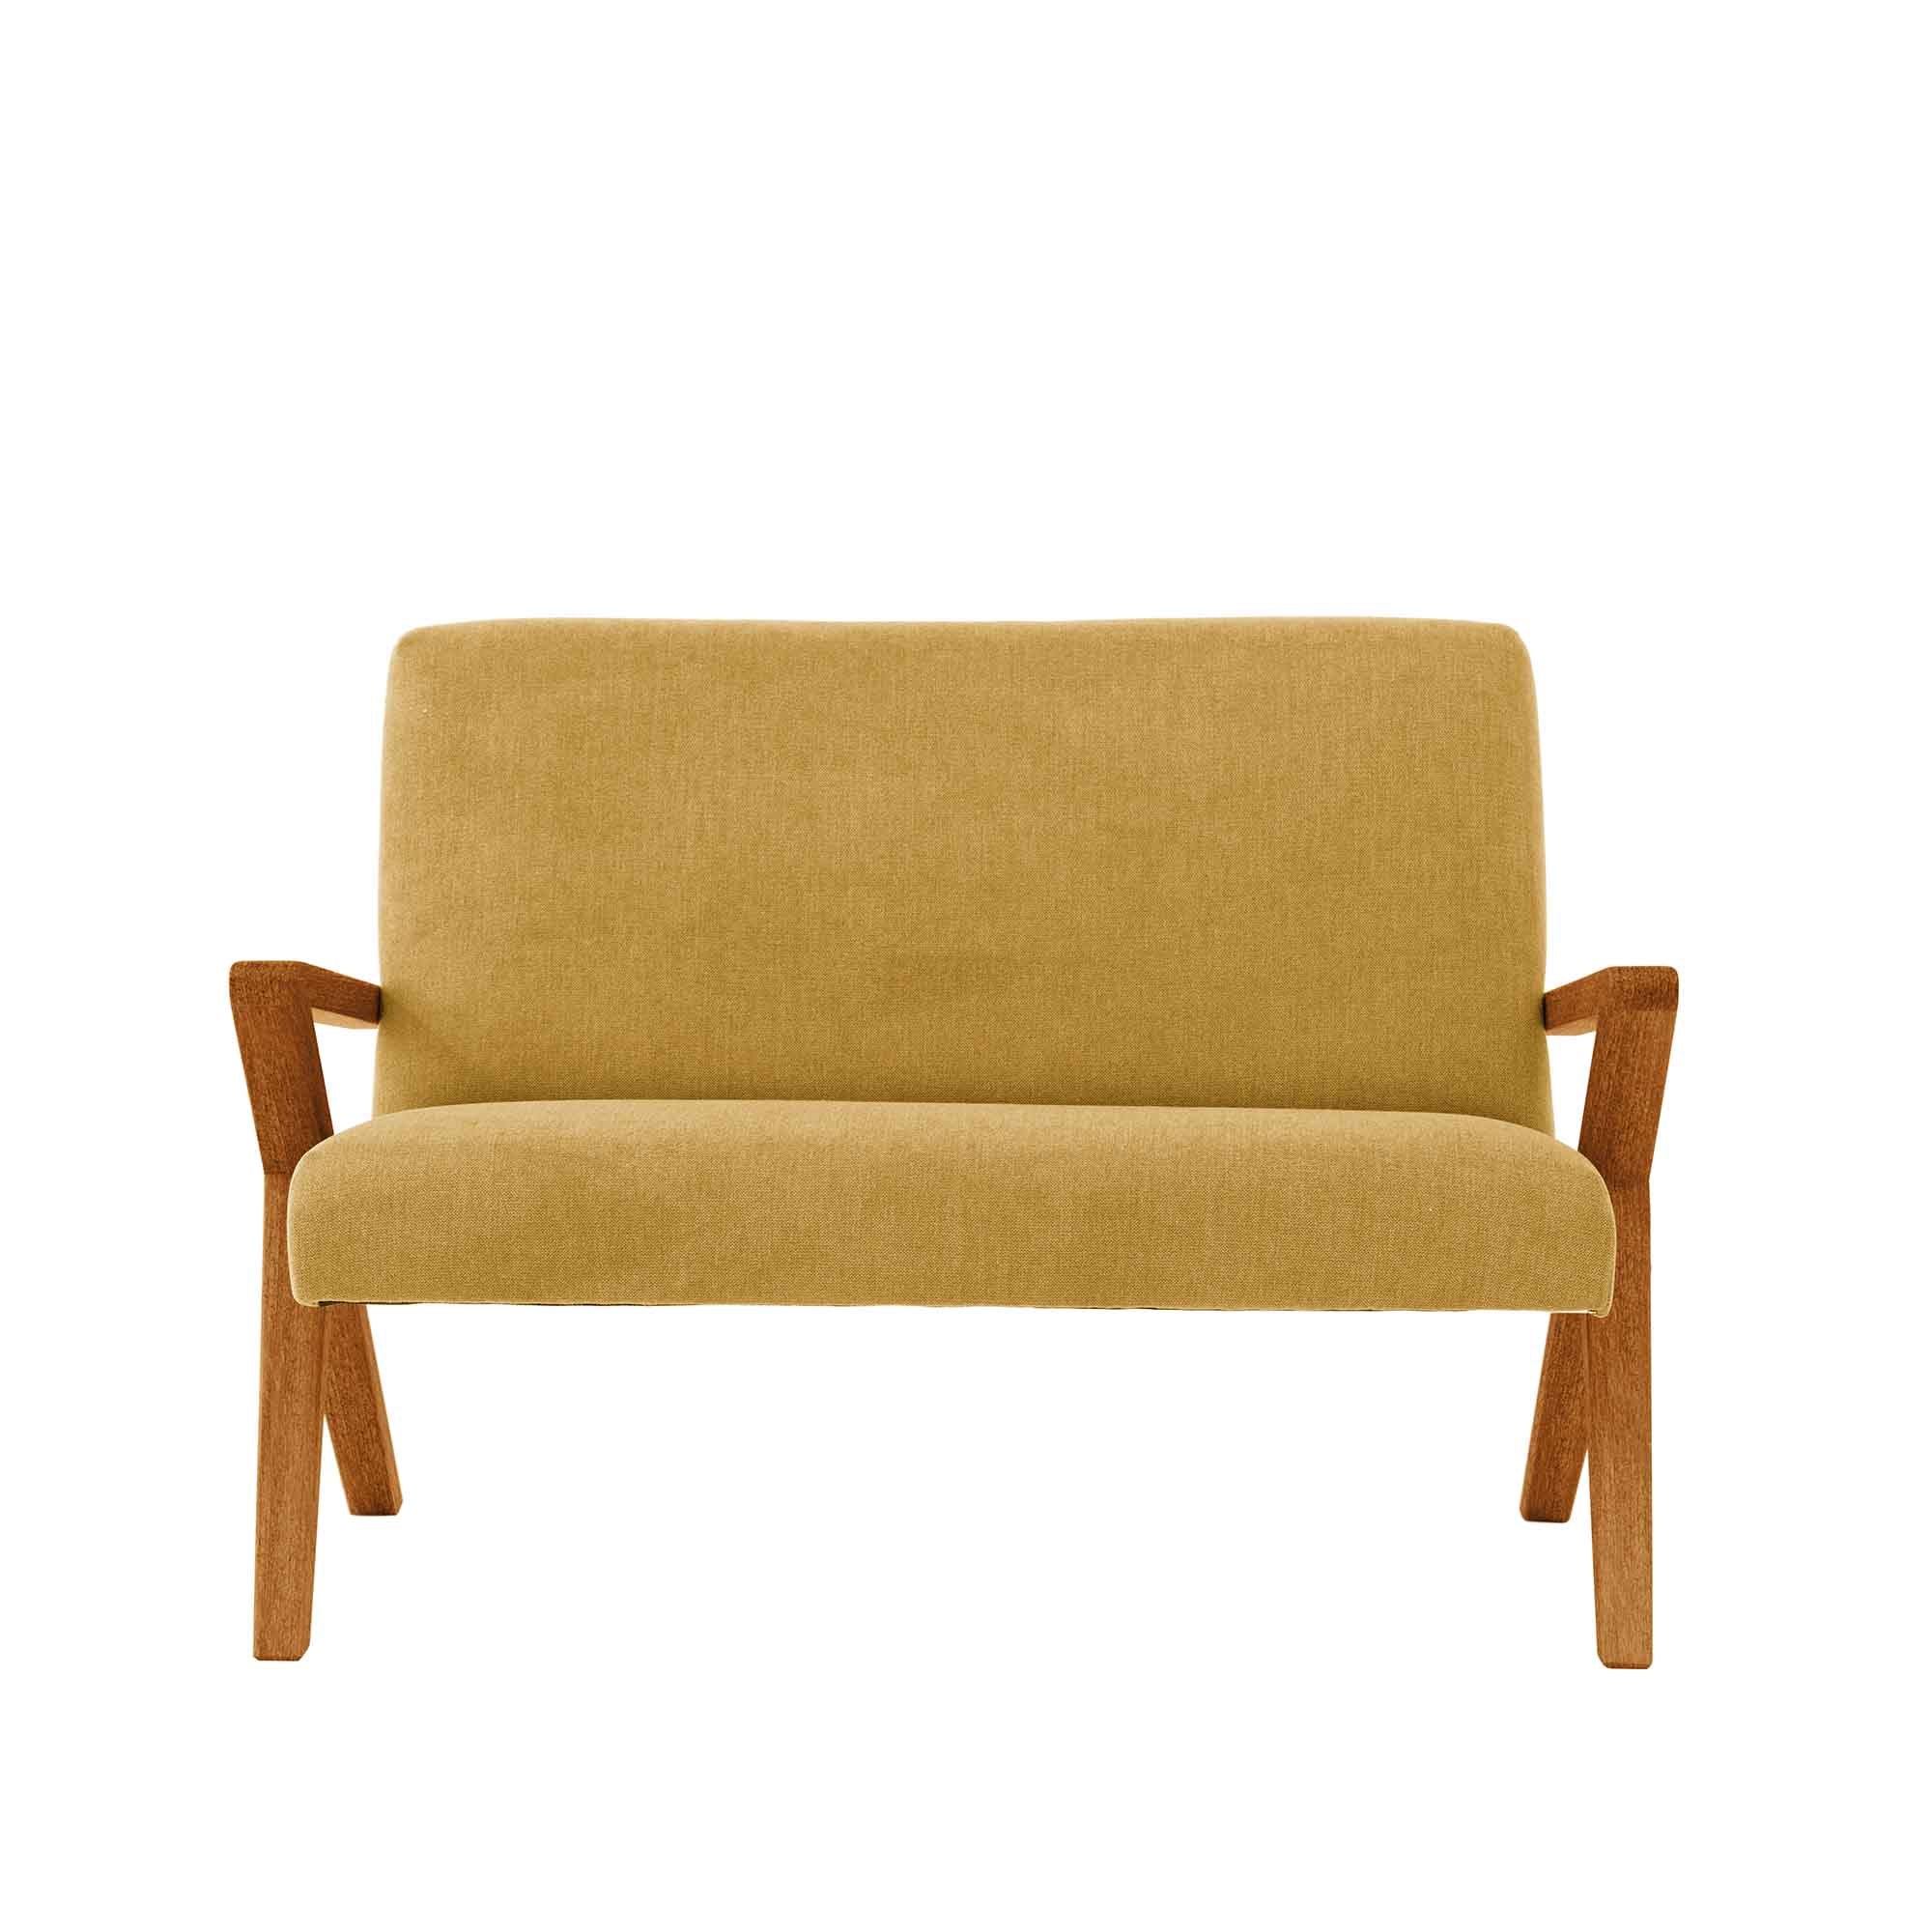 2 Seater Sofa, Beech Wood Frame, Oak Colour yellow fabric, front view